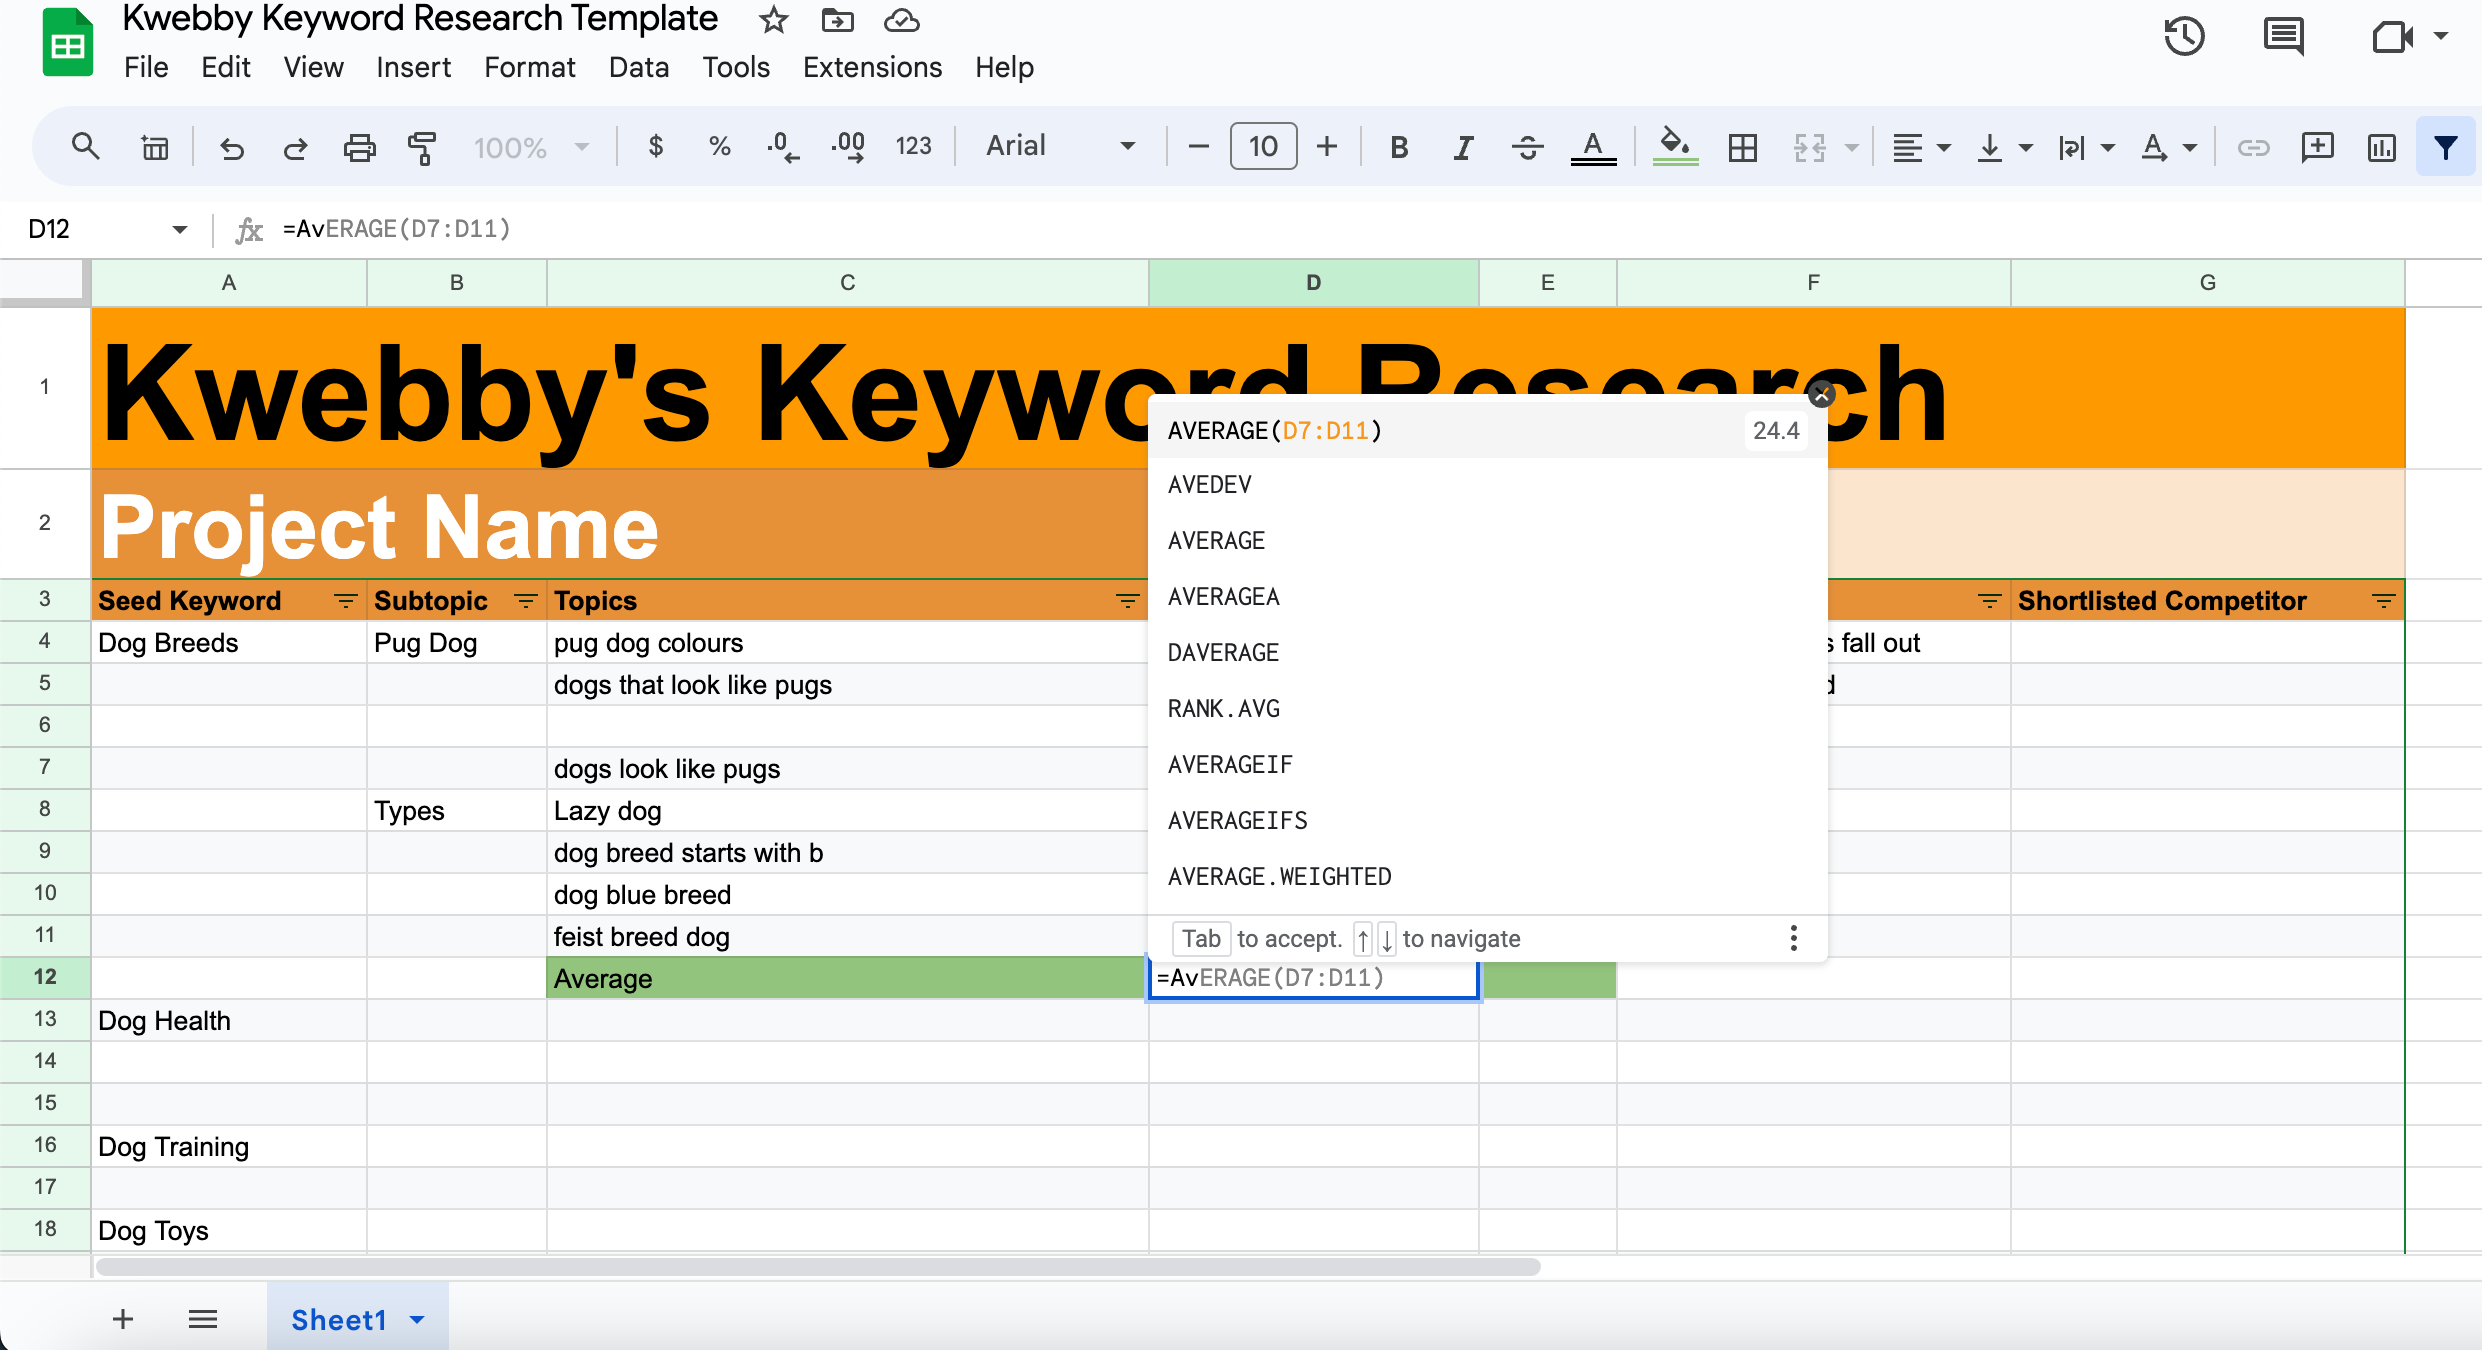 How to do Keyword Research for New Sites to Get 100k Traffic (Template Inside) 13